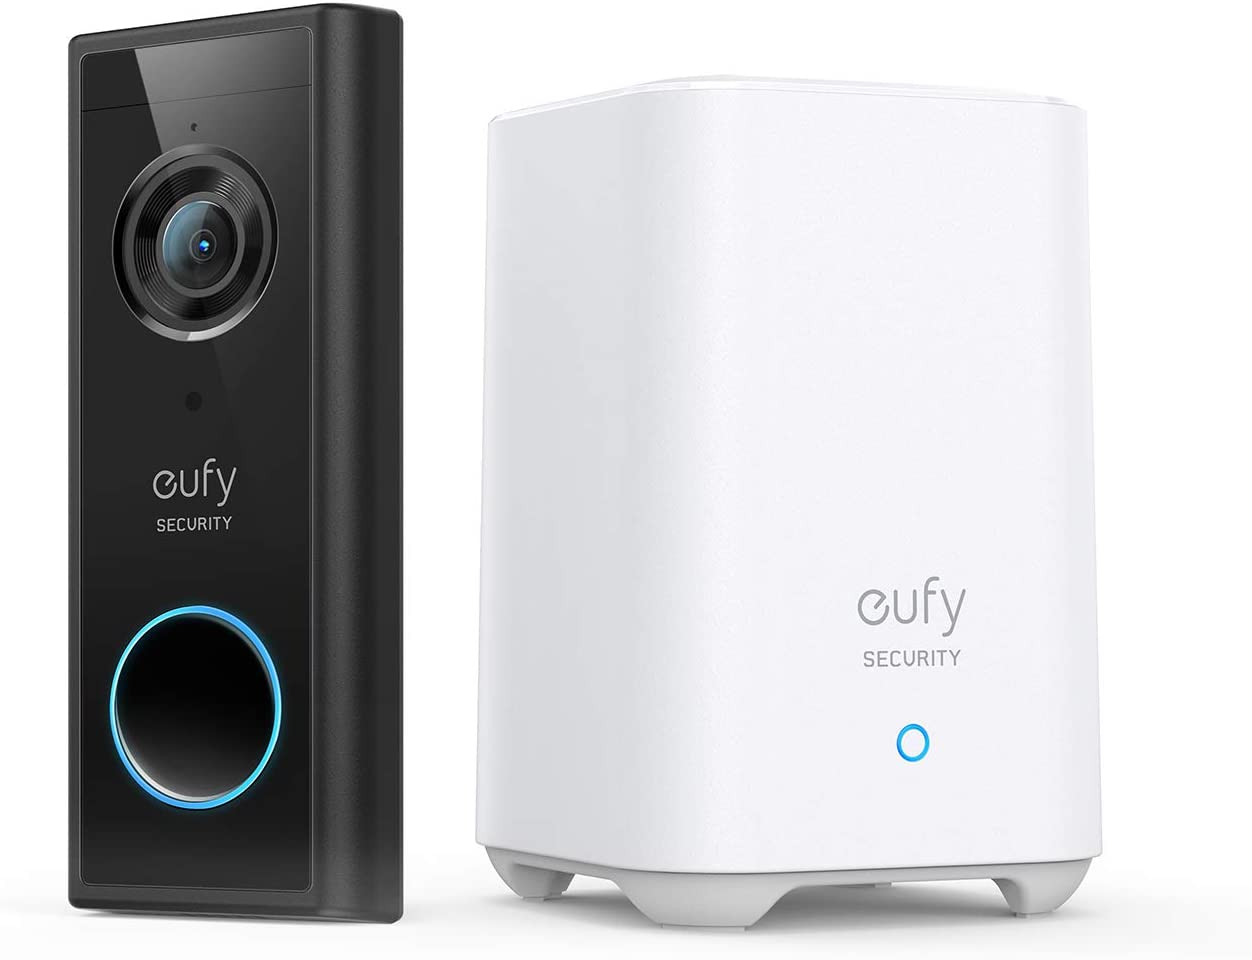 Deal of the Day: eufy Security Video Doorbell (Battery-Powered) Kit 2K Resolution $139.99 + FS